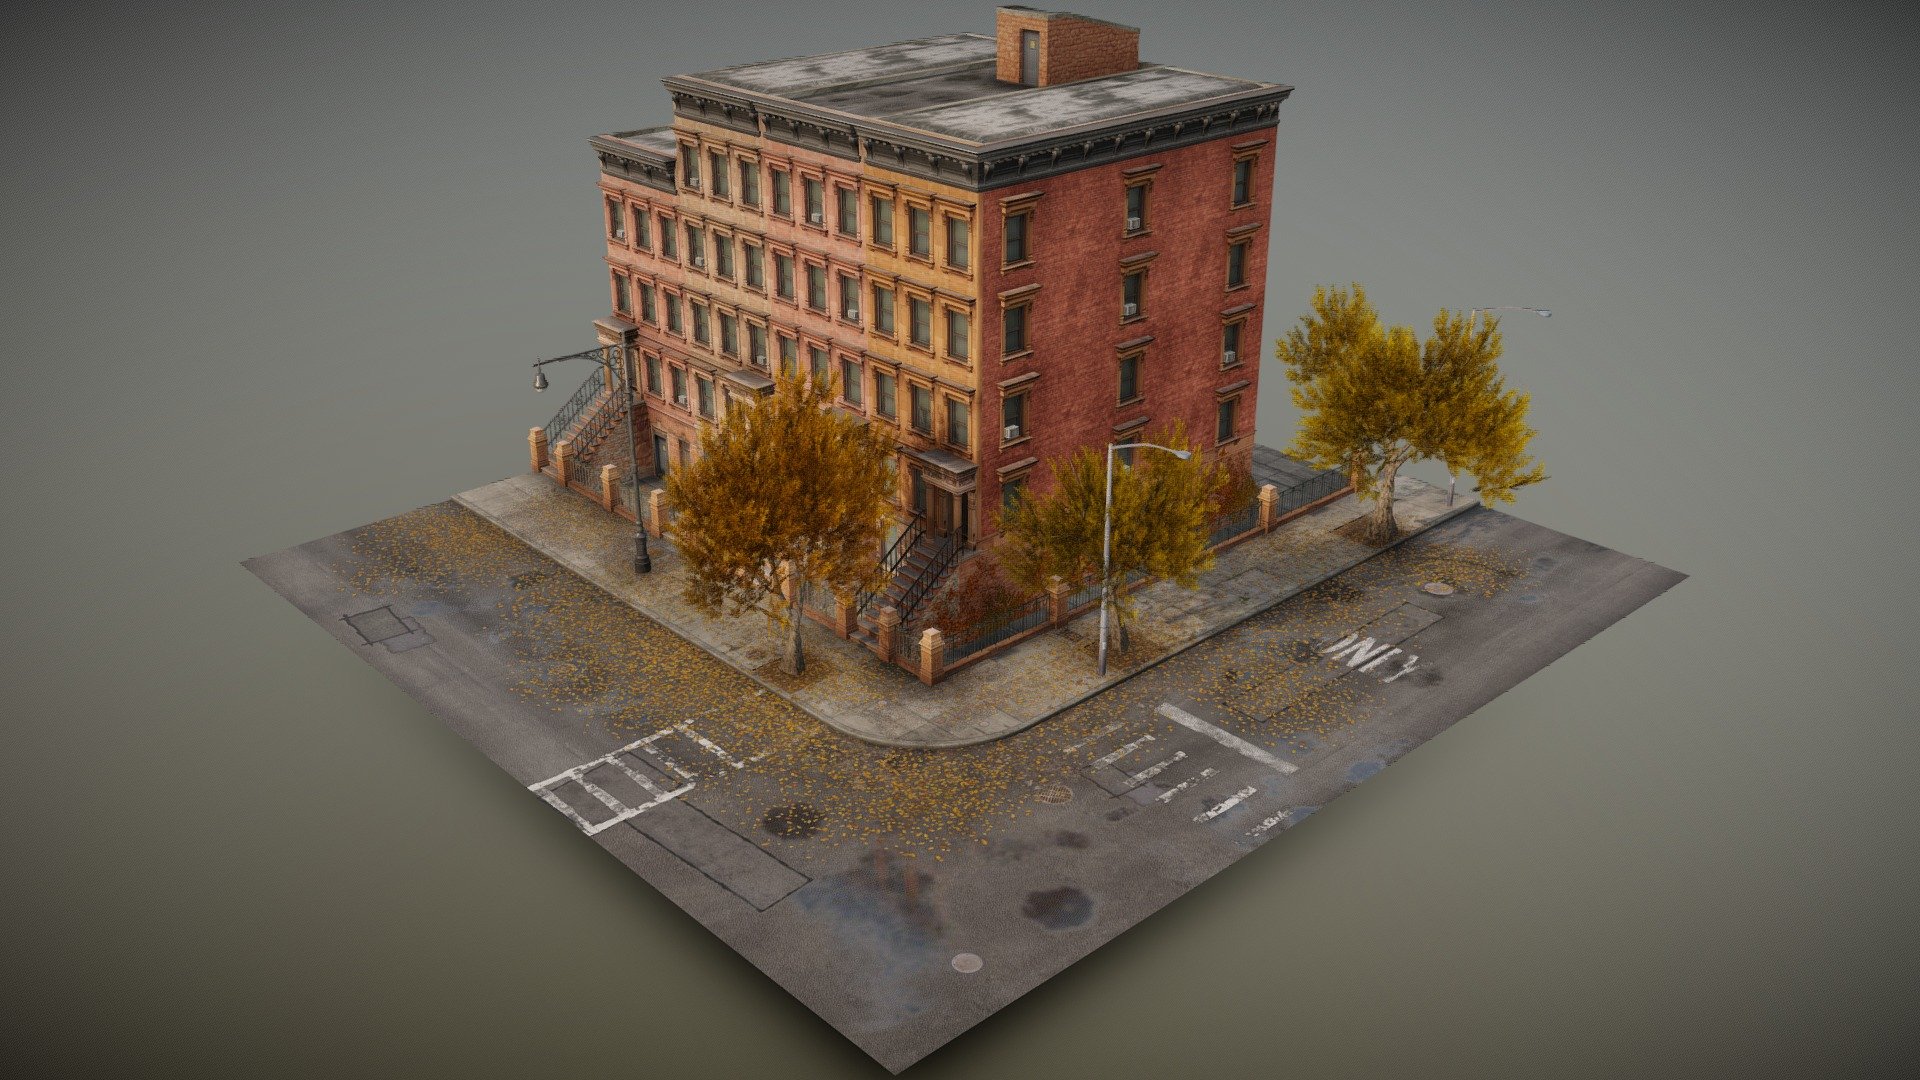 A lovely and detailed Brooklyn street scene in autumn season. It has a street intersection and modular high poly houses with different variants. The scene uses PBR materials and clean topology so you'll have no problem dissecting /adding new features for your personal projects. Enjoy and have a nice day. 😁

Scene Information:




Modelled in Blender 3.3.2

Fully UV unwrapped

All materials are allocated to their objects.

Textures Included:




1k/2k resolution textures

Diffuse

Roughness

Normal (Open GL)

Opacity 

Formats:

.obj 
.blend - Cozy Autumn Brooklyn Neighbourhood Kit - Buy Royalty Free 3D model by 99.Miles 3d model